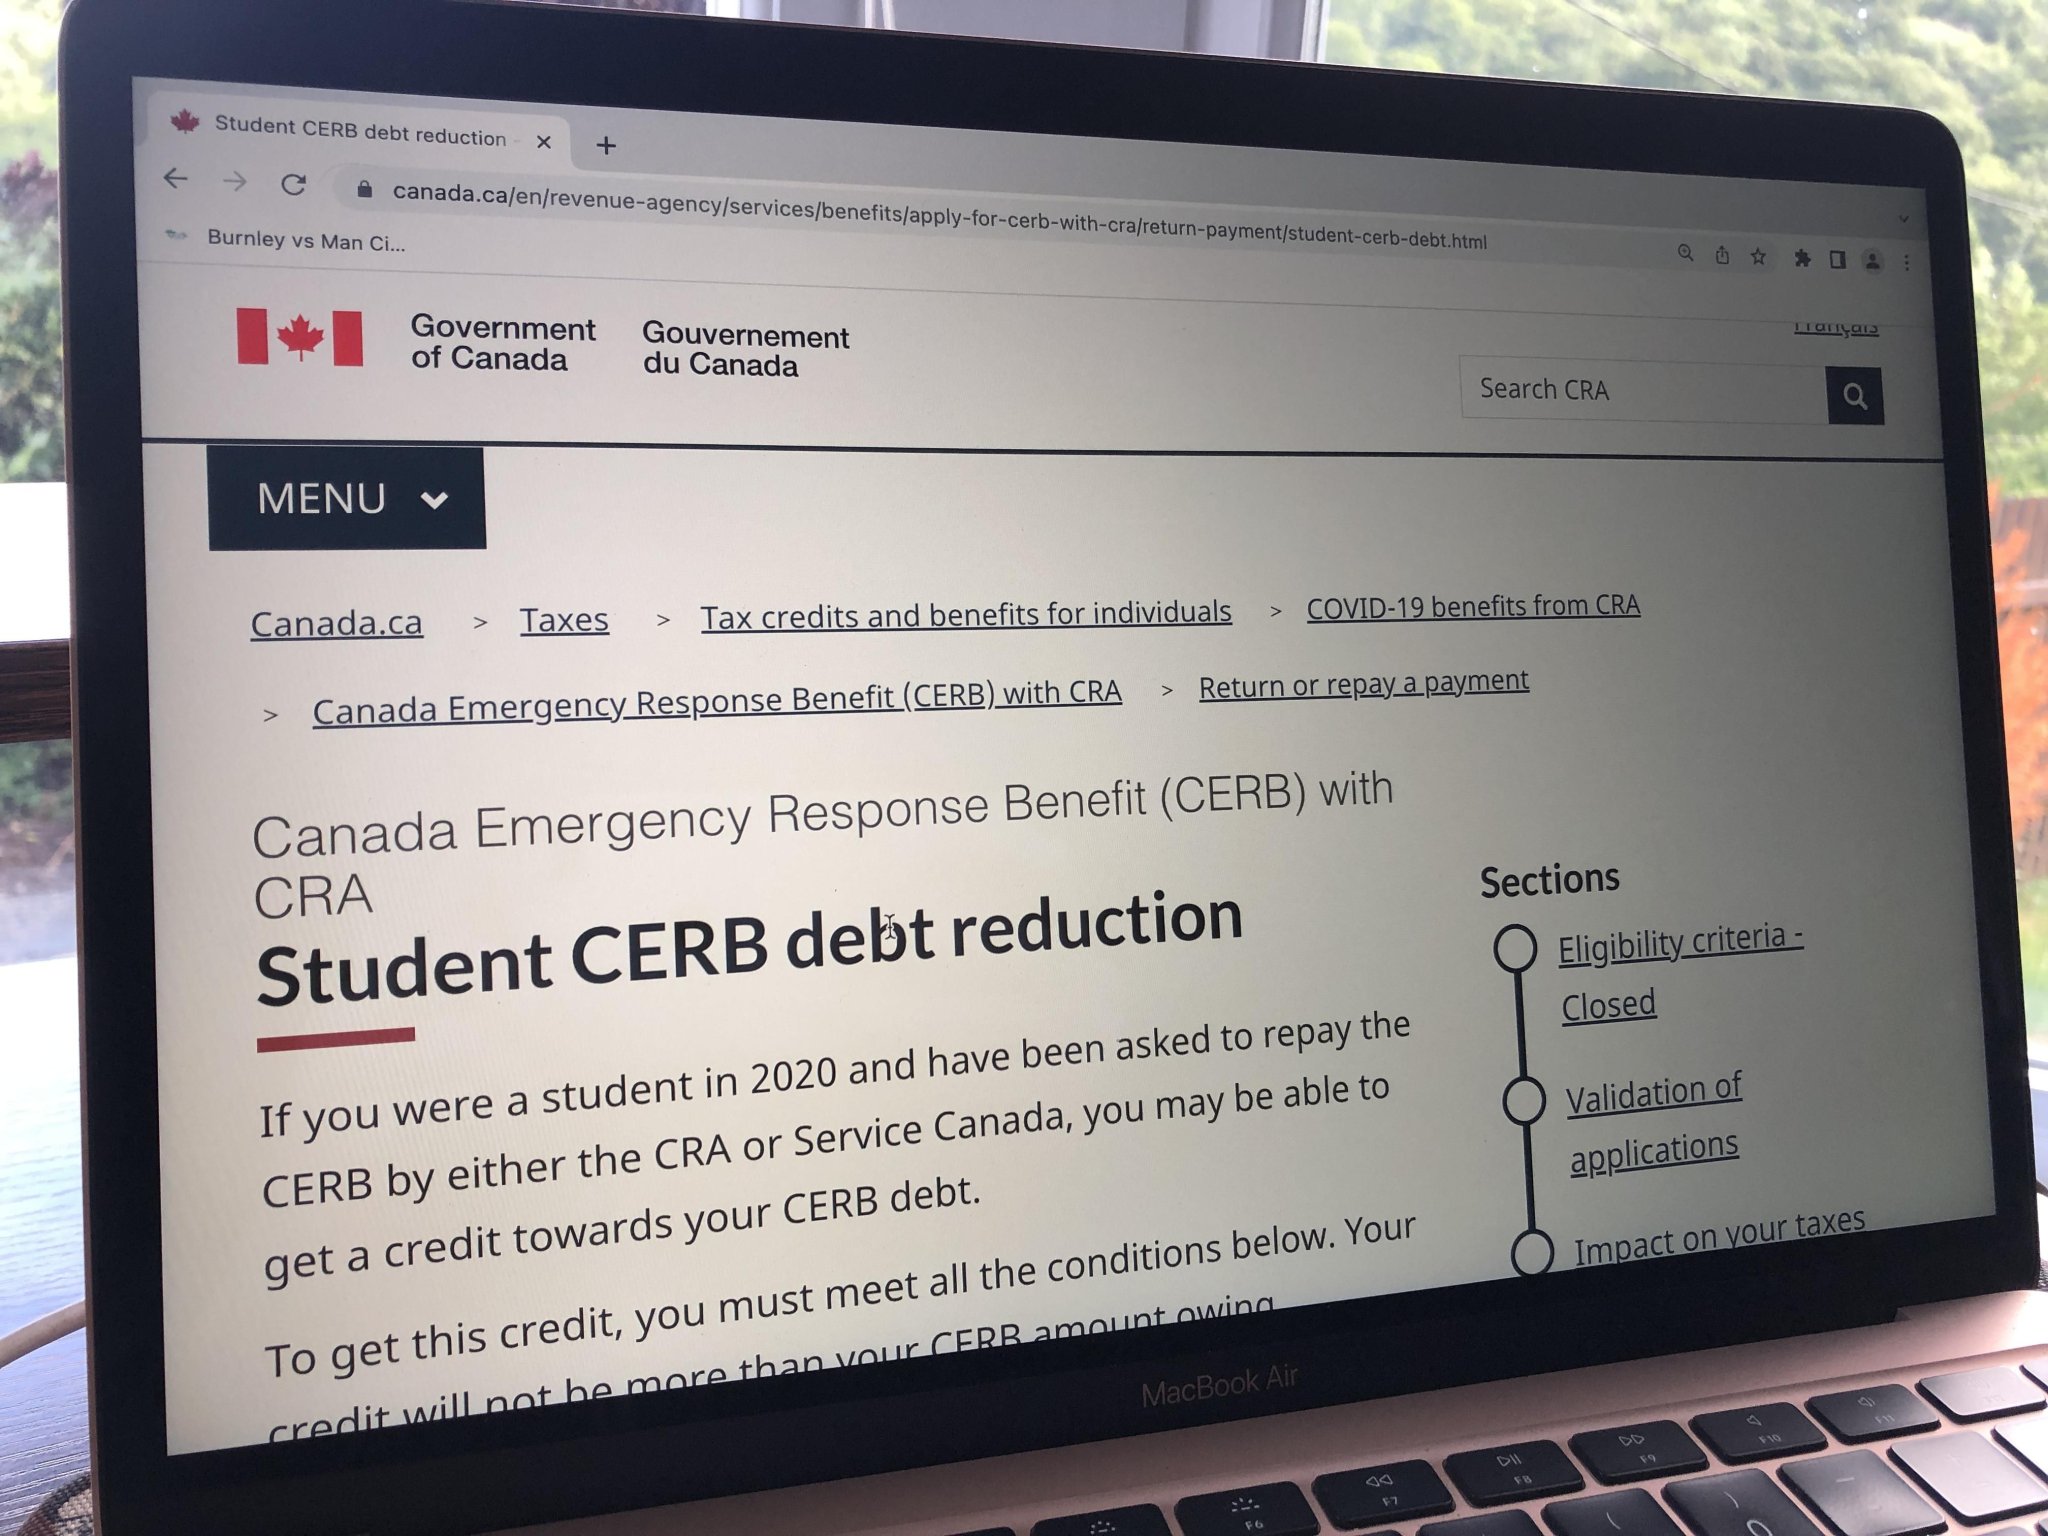 Nearly 100K Students In Canada Could Avoid Full CERB Repayments & Here's How